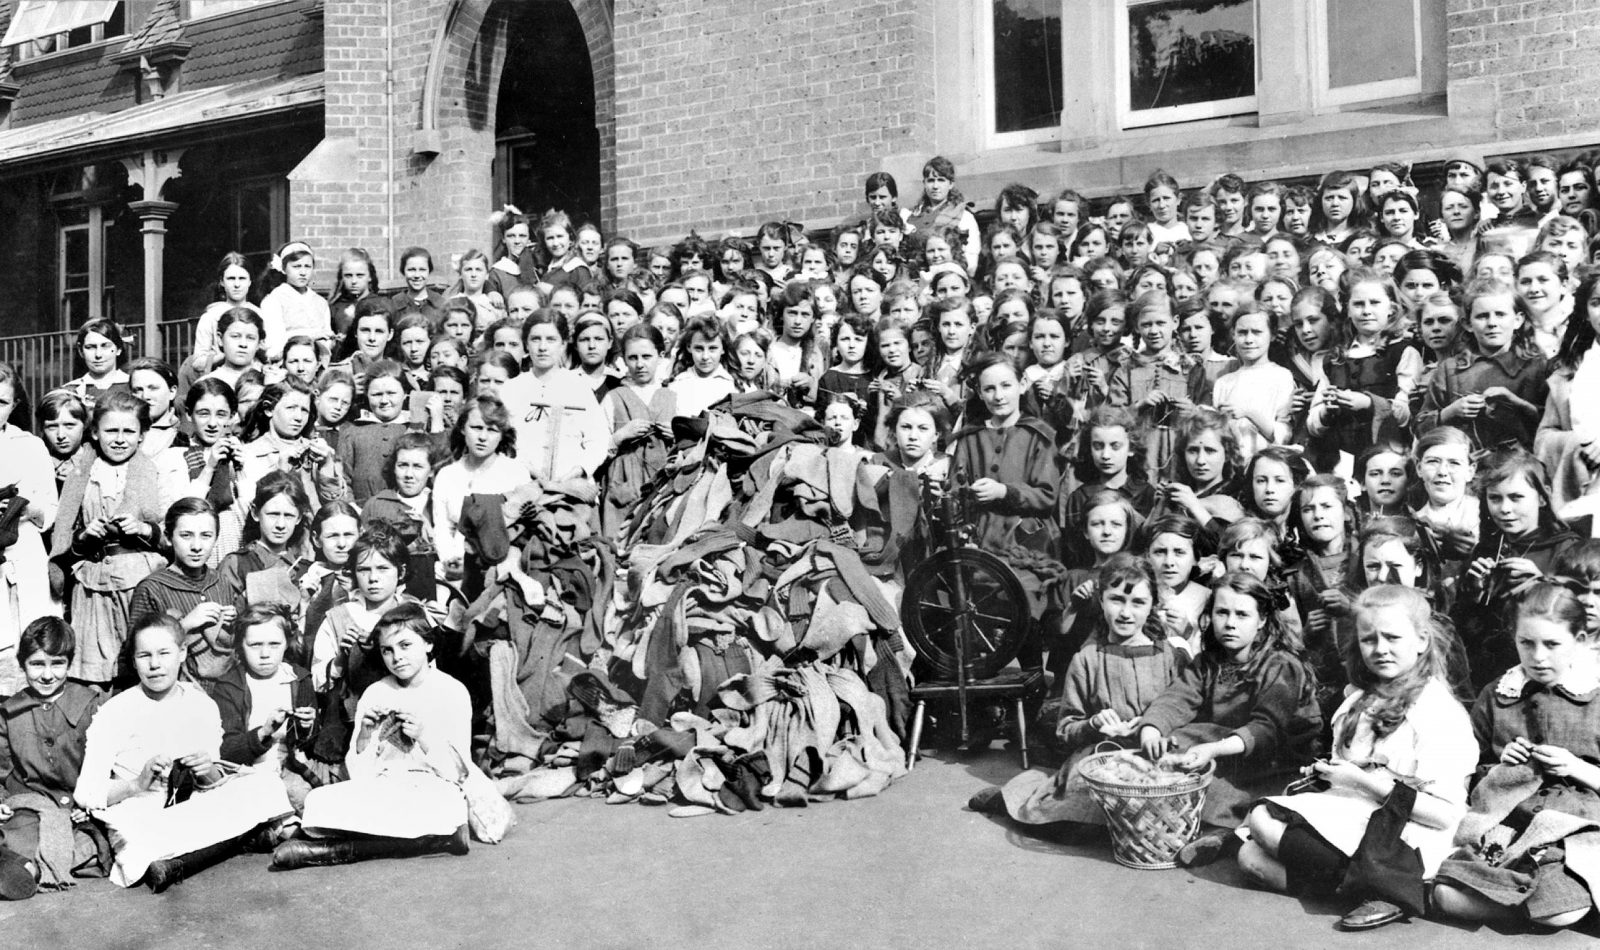 A large group of school children in front of red-brick building, assembled around a spinning wheel and a large pile of socks